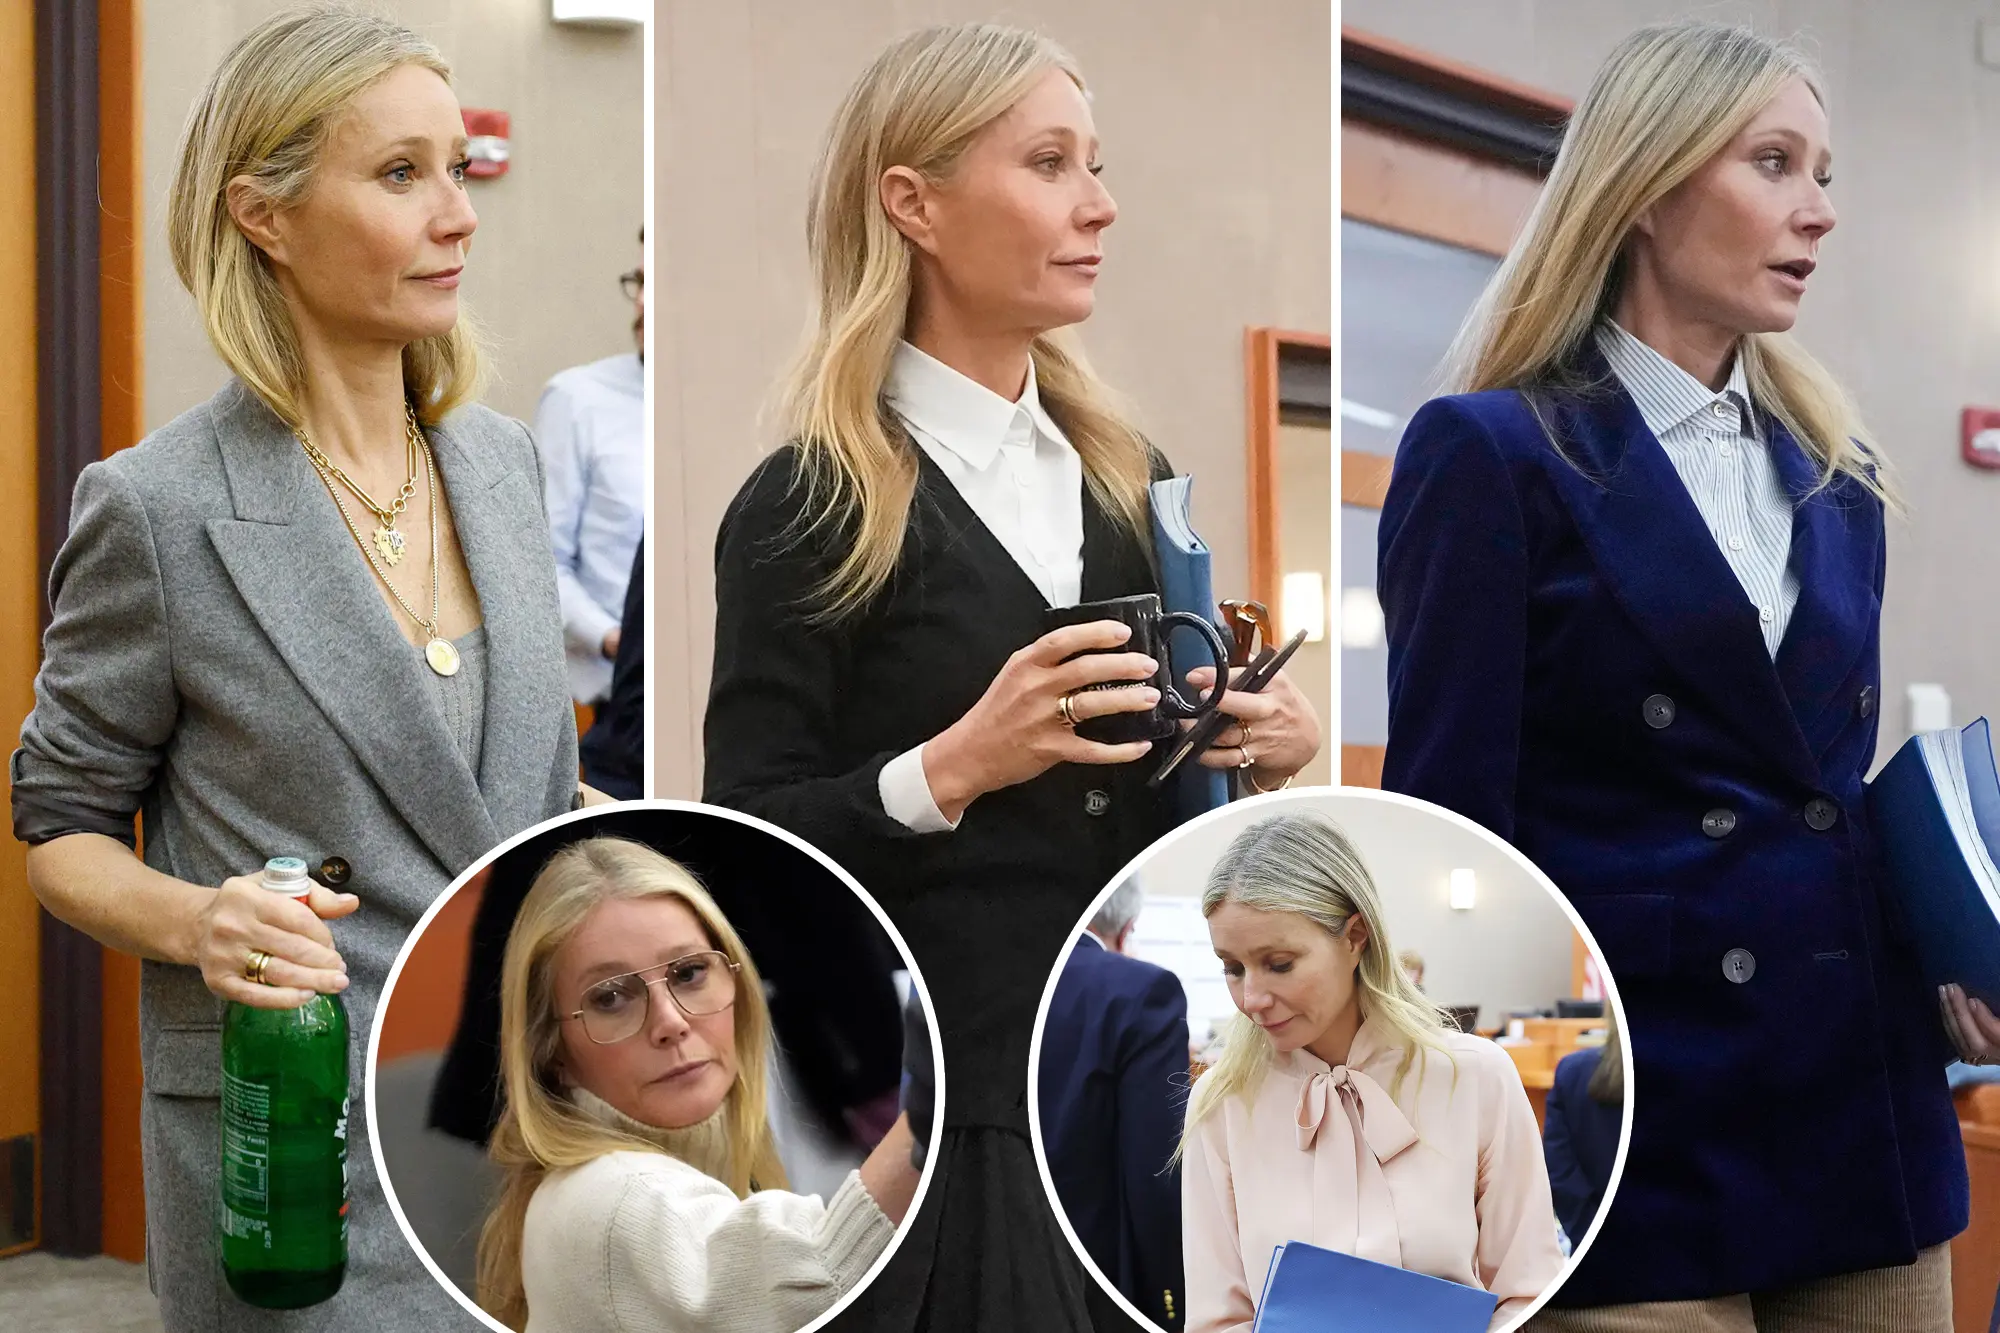 Gwyneth Paltrow's courtroom looks: What she wore during ski trial